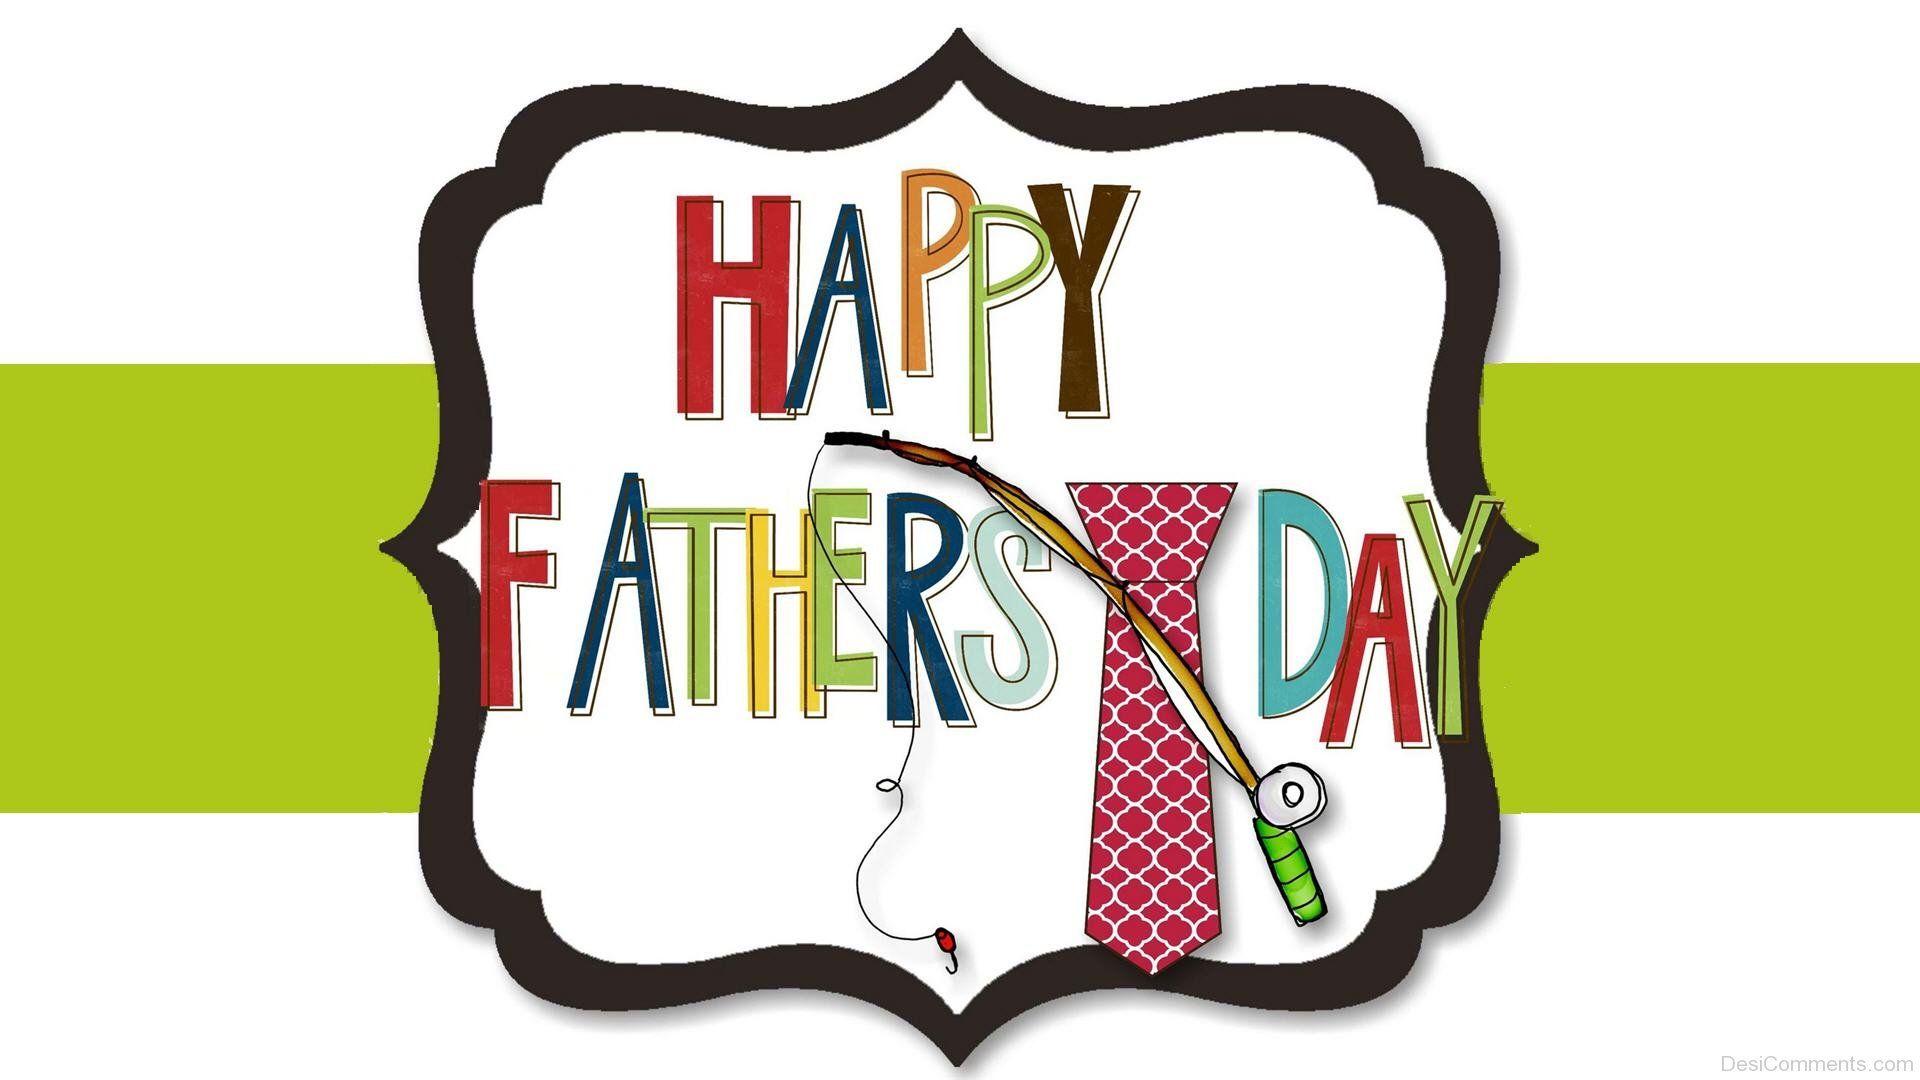 Father's Day Picture, Image, Graphics